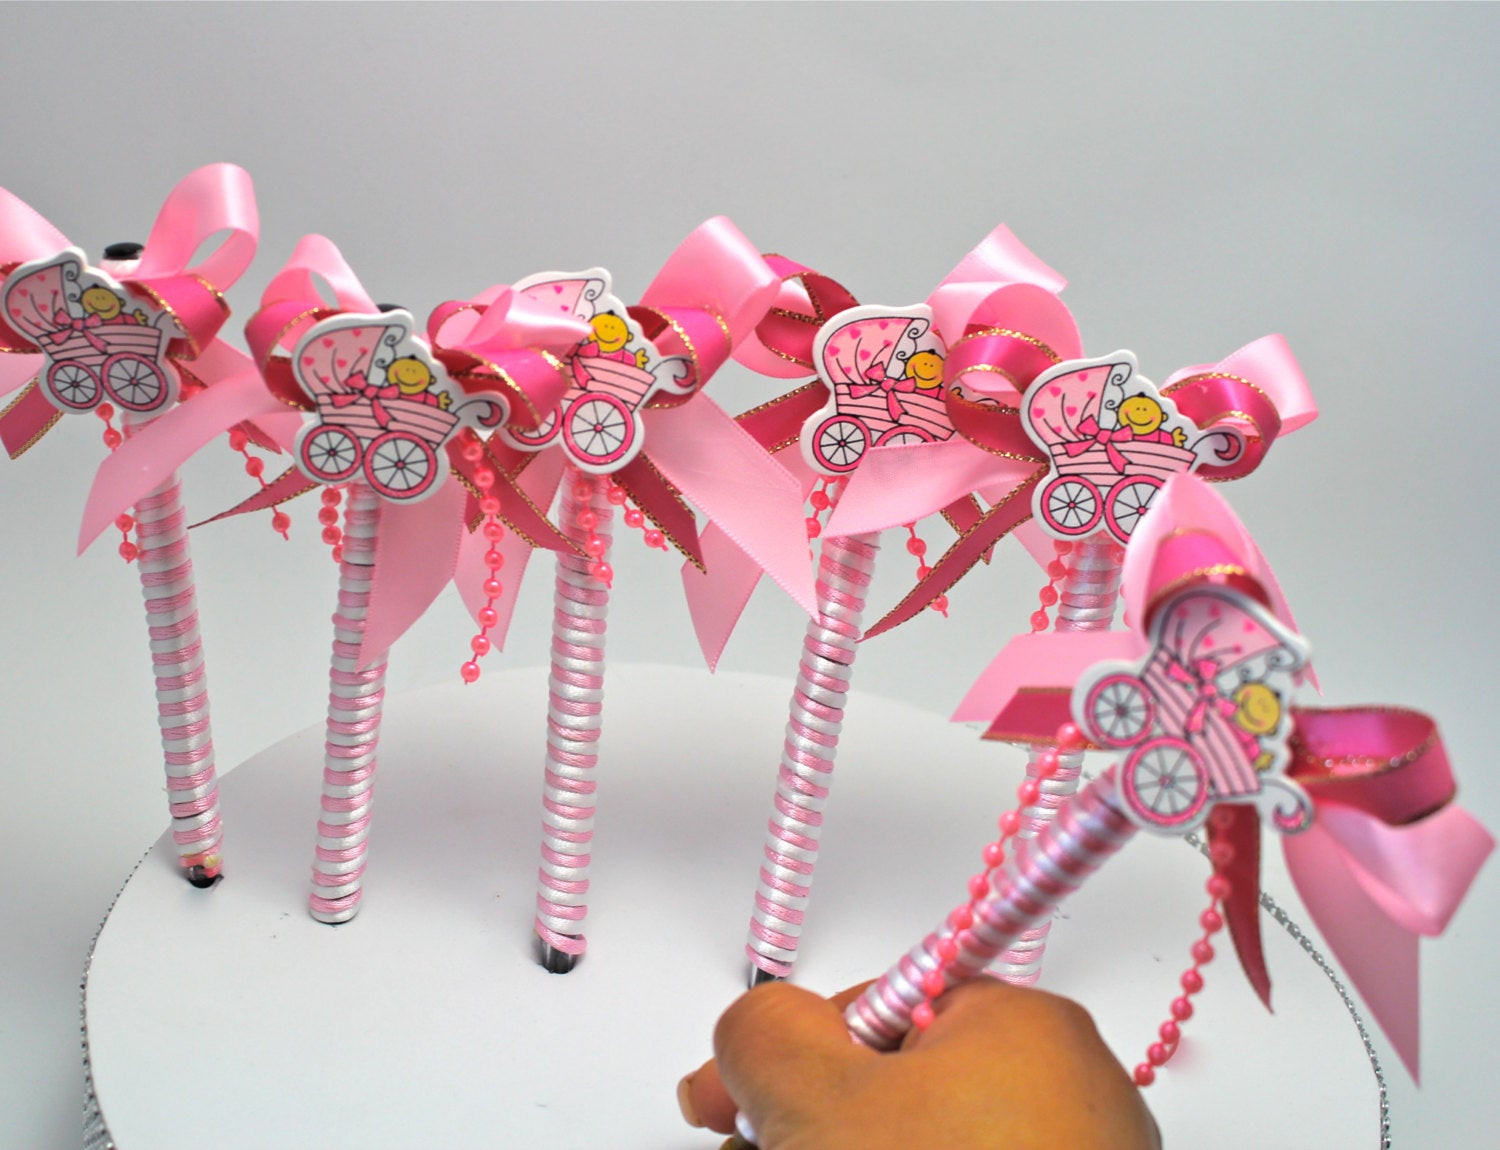 Party Favors For Baby Shower
 Pink Baby Shower Pen Favor Party Favors by FavorsBoutique